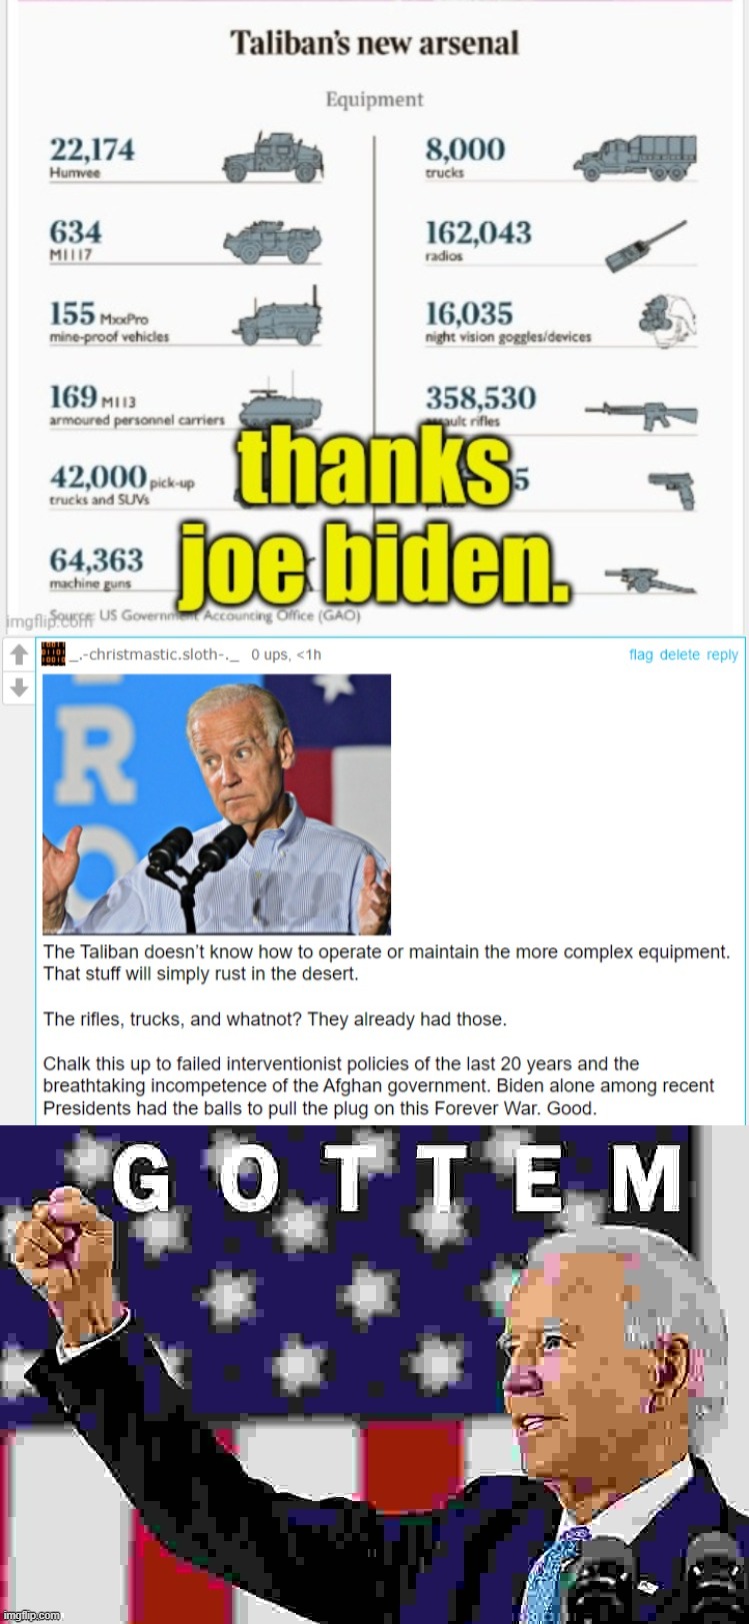 The Taliban captured radios, night vision goggles, rifles, trucks, and some shit they can't use. Oh noes! | image tagged in taliban's new arsenal debunked,joe biden gottem 2 sharpened jpeg min quality | made w/ Imgflip meme maker